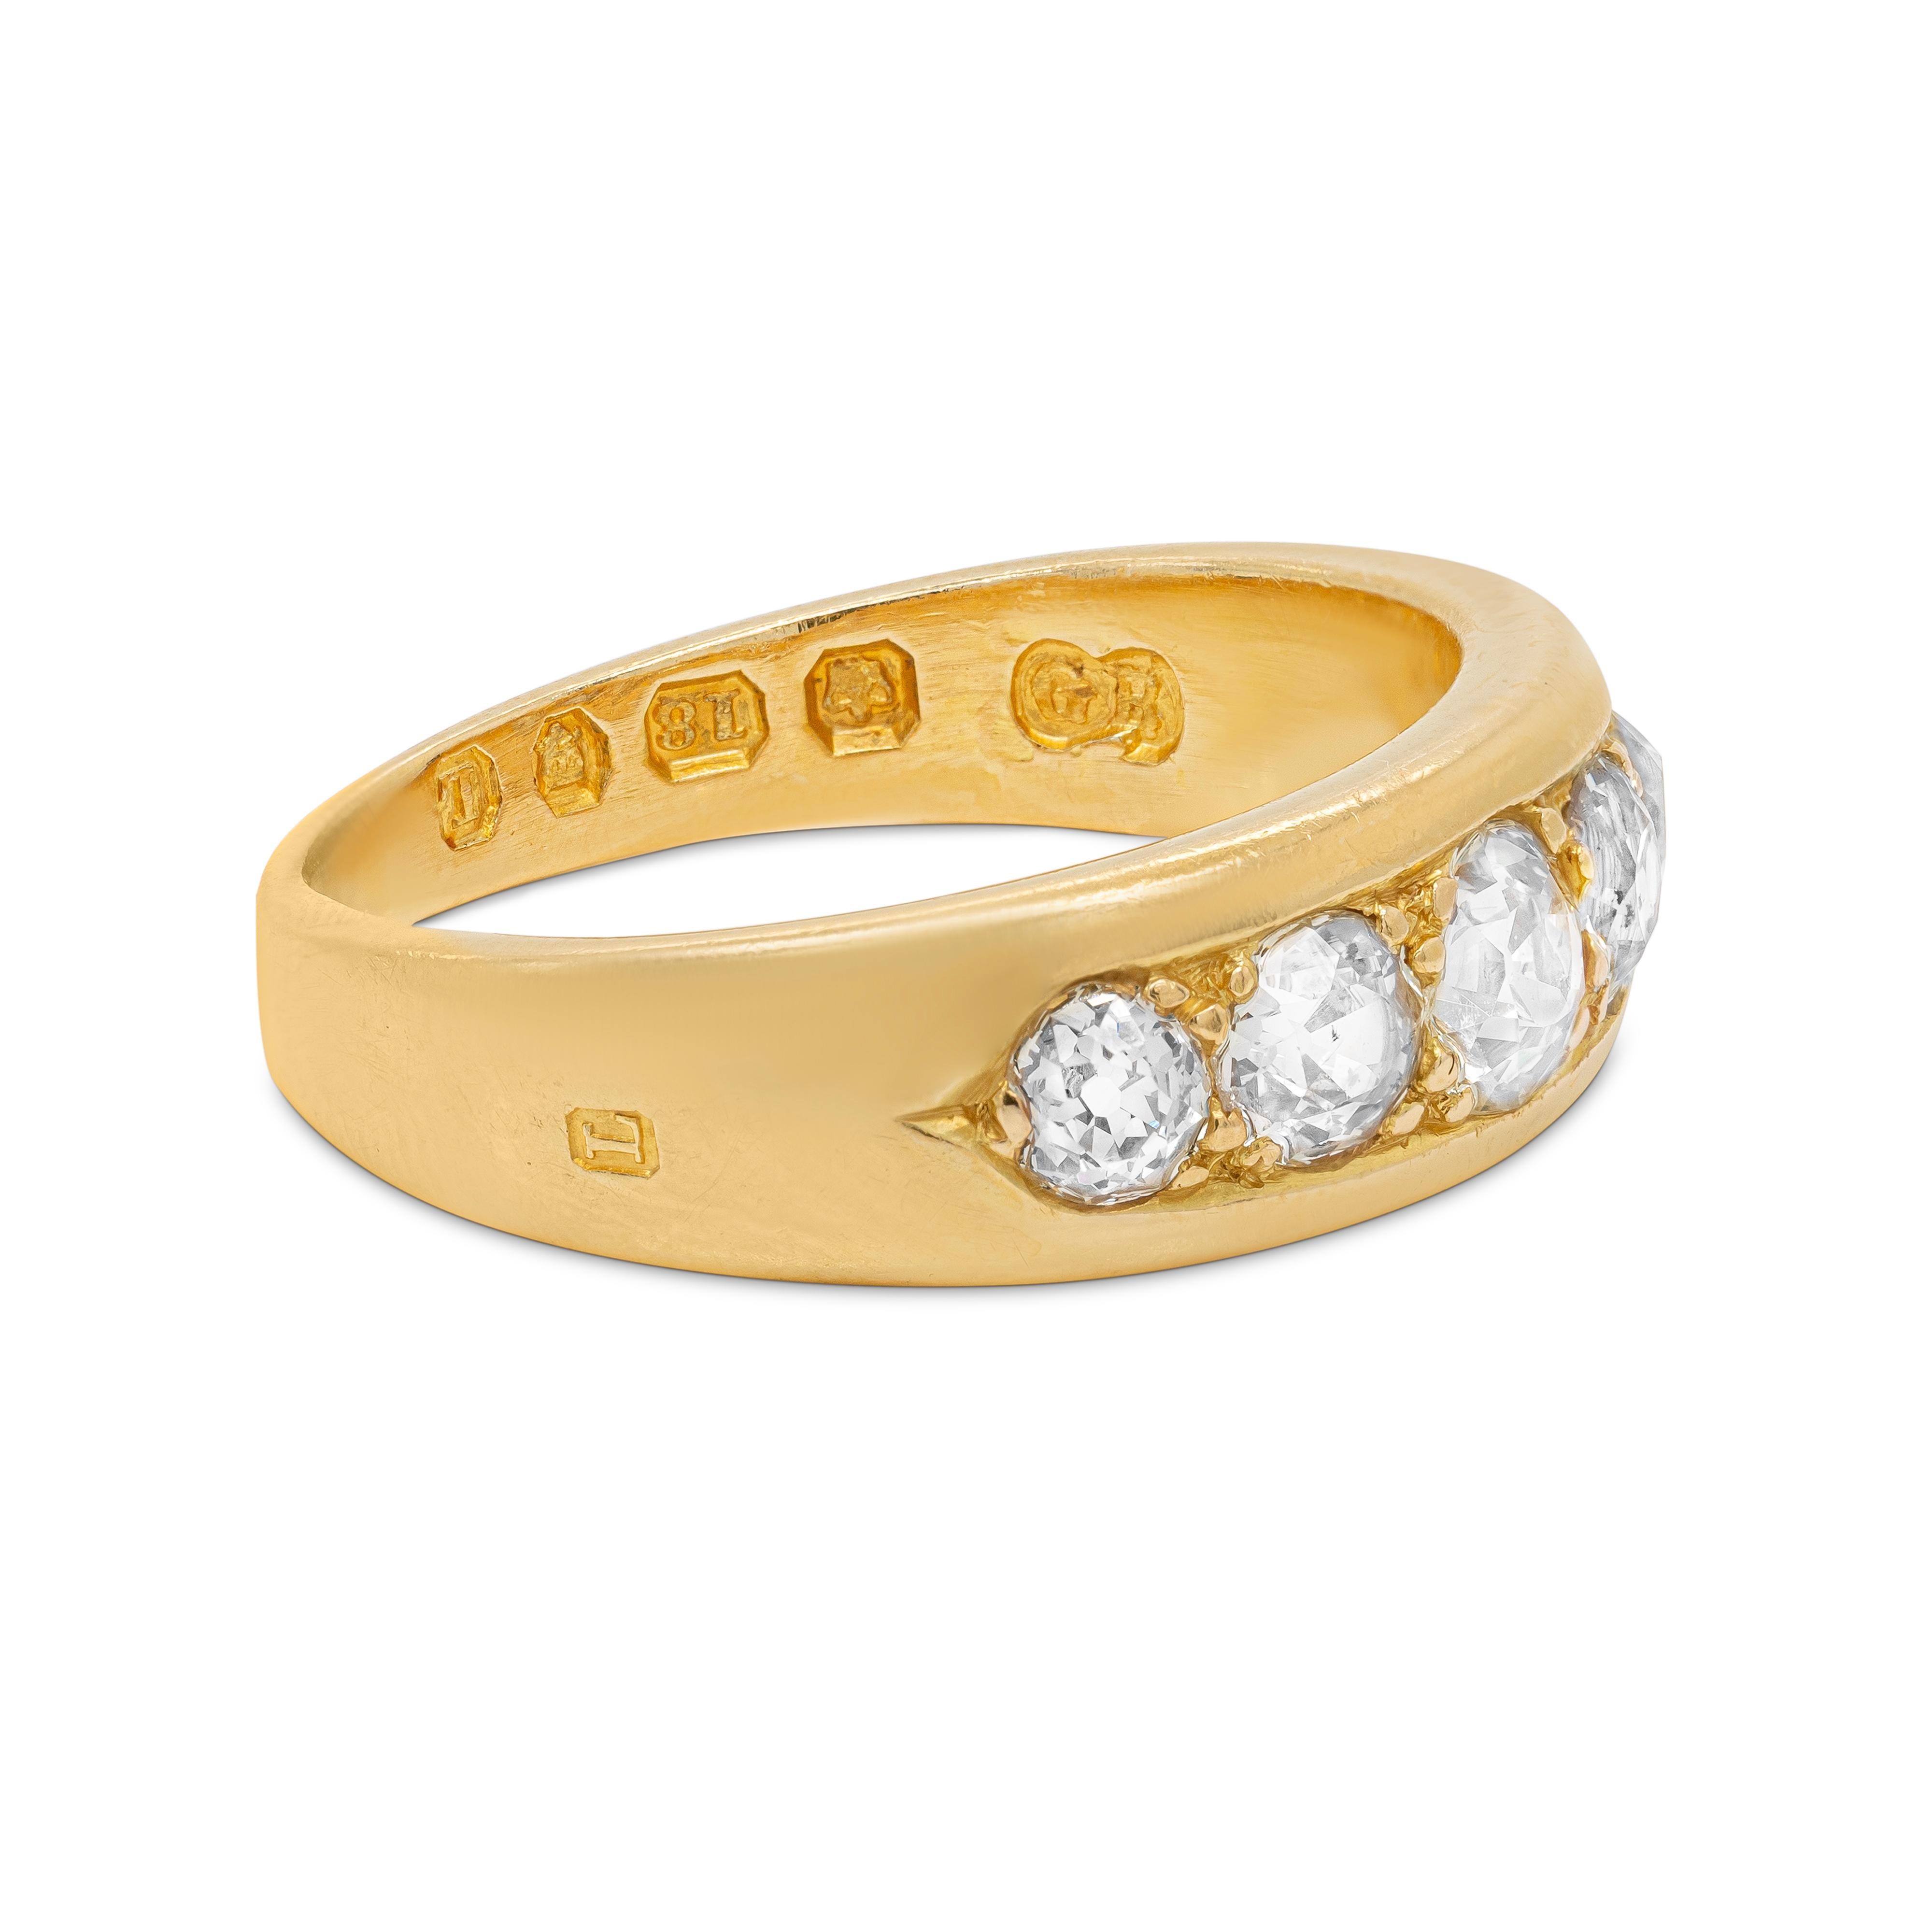 This wonderful antique Victorian ring is beautifully set with five old mine cut diamonds, weighing approximately 1.10ct combined, all grain set in 18 carat yellow gold open back settings. This beautiful piece weighs 7.04 grams, measures 6.88mm in